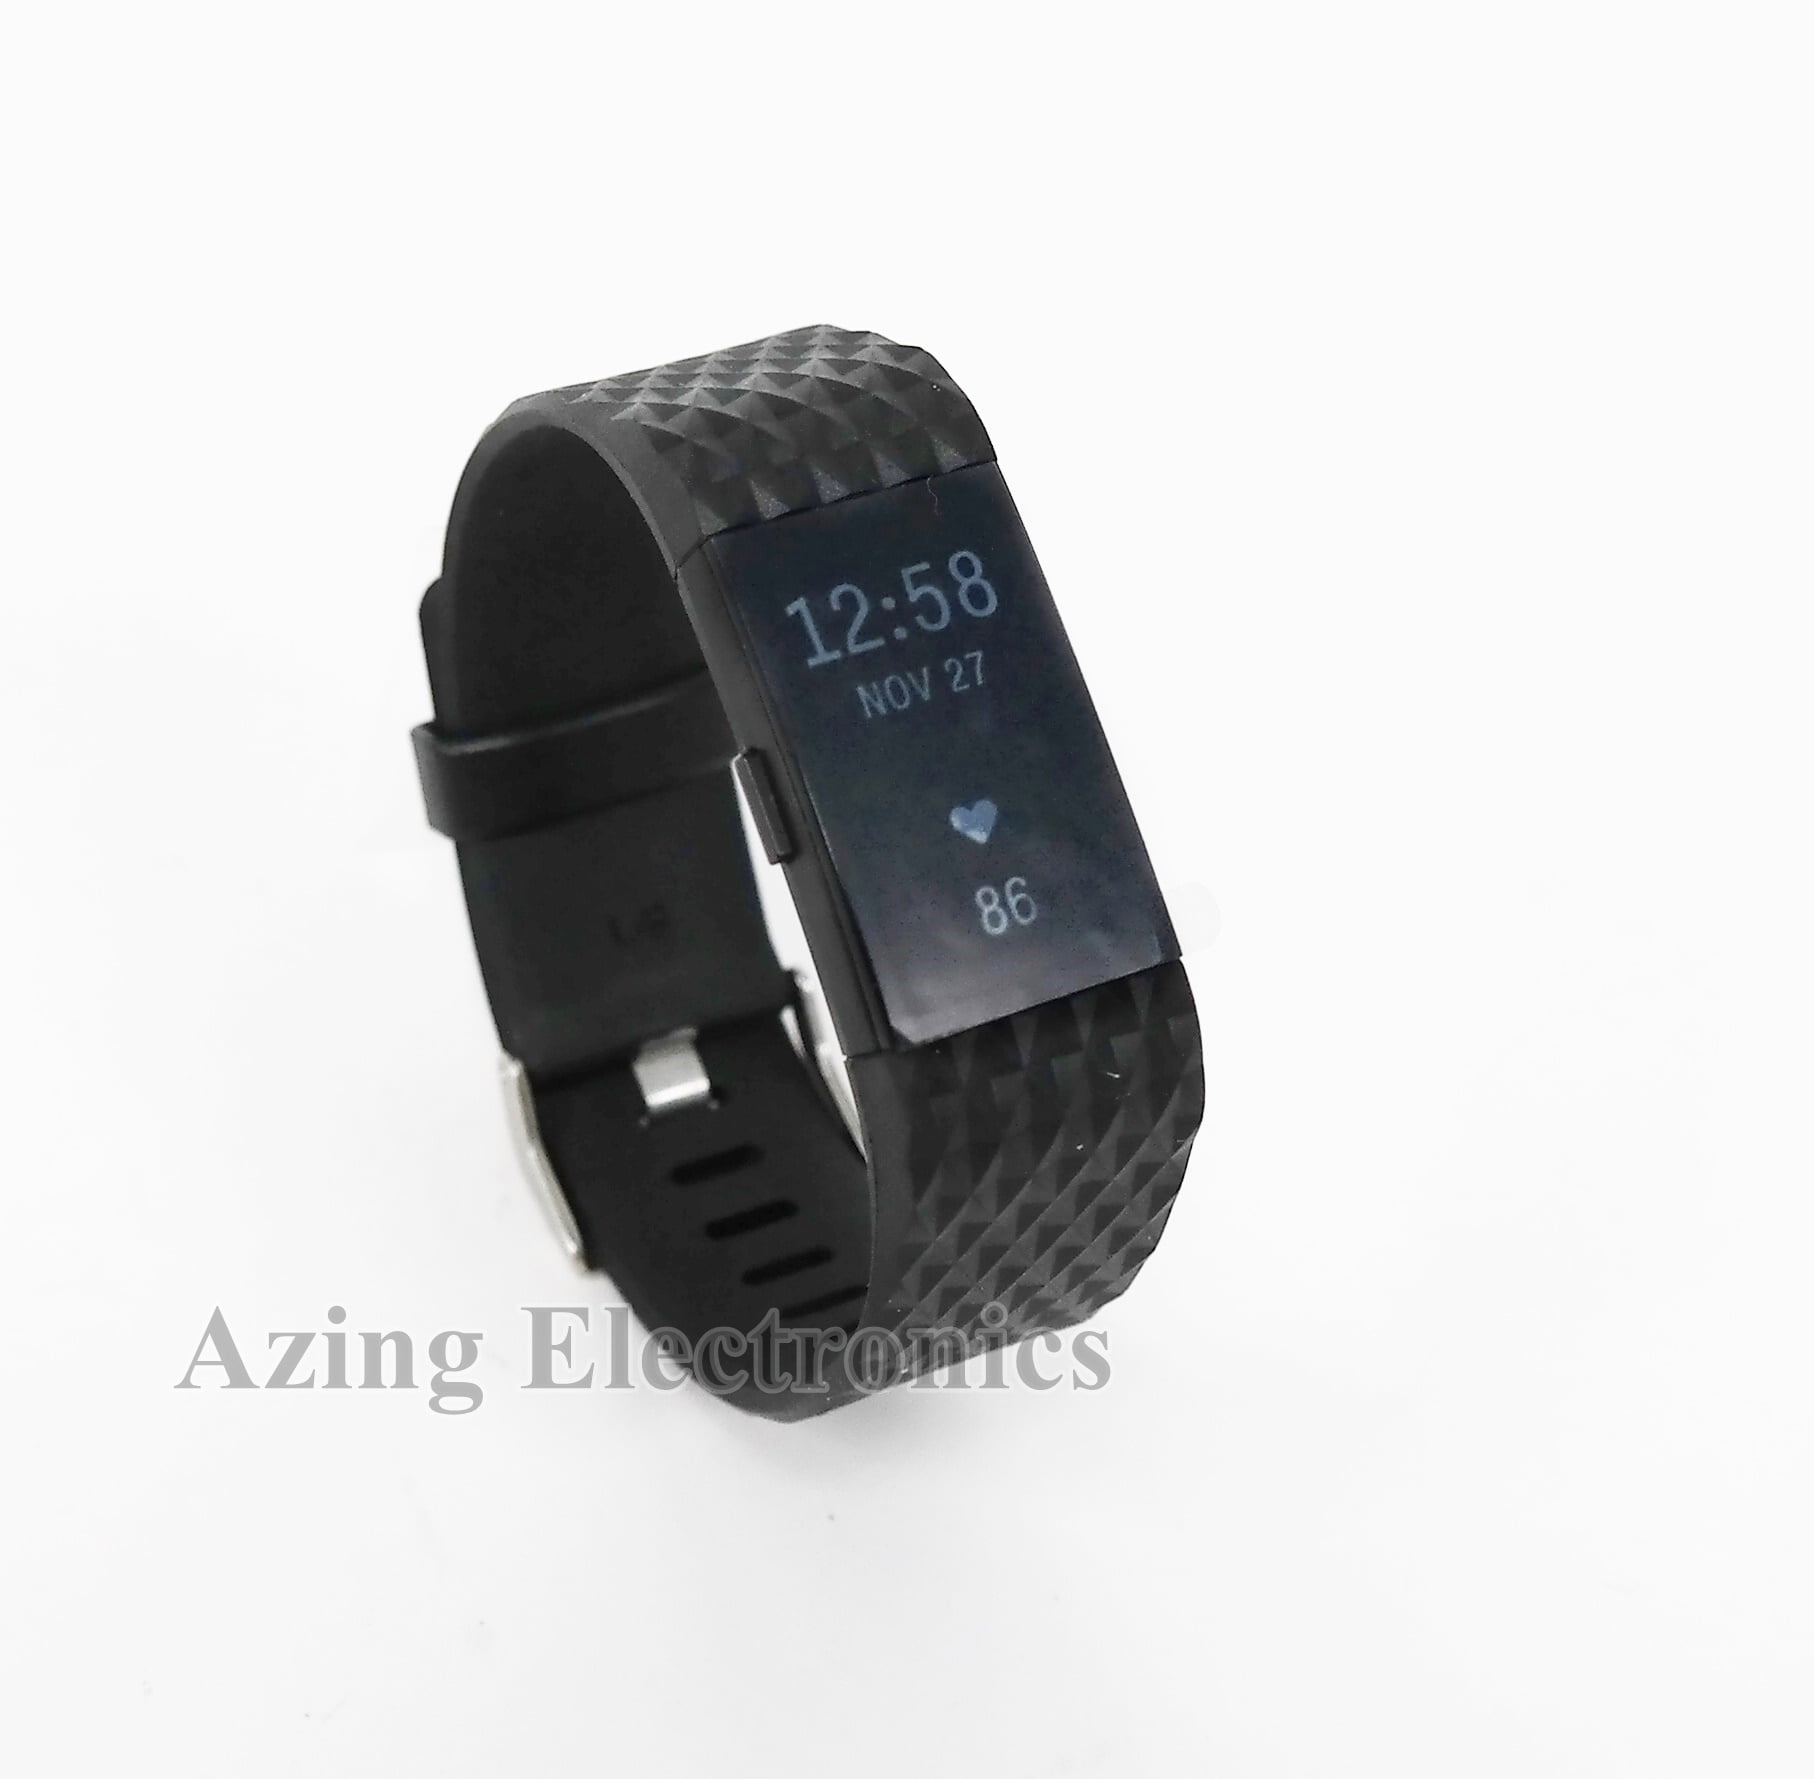 refurbished fitbit charge 2